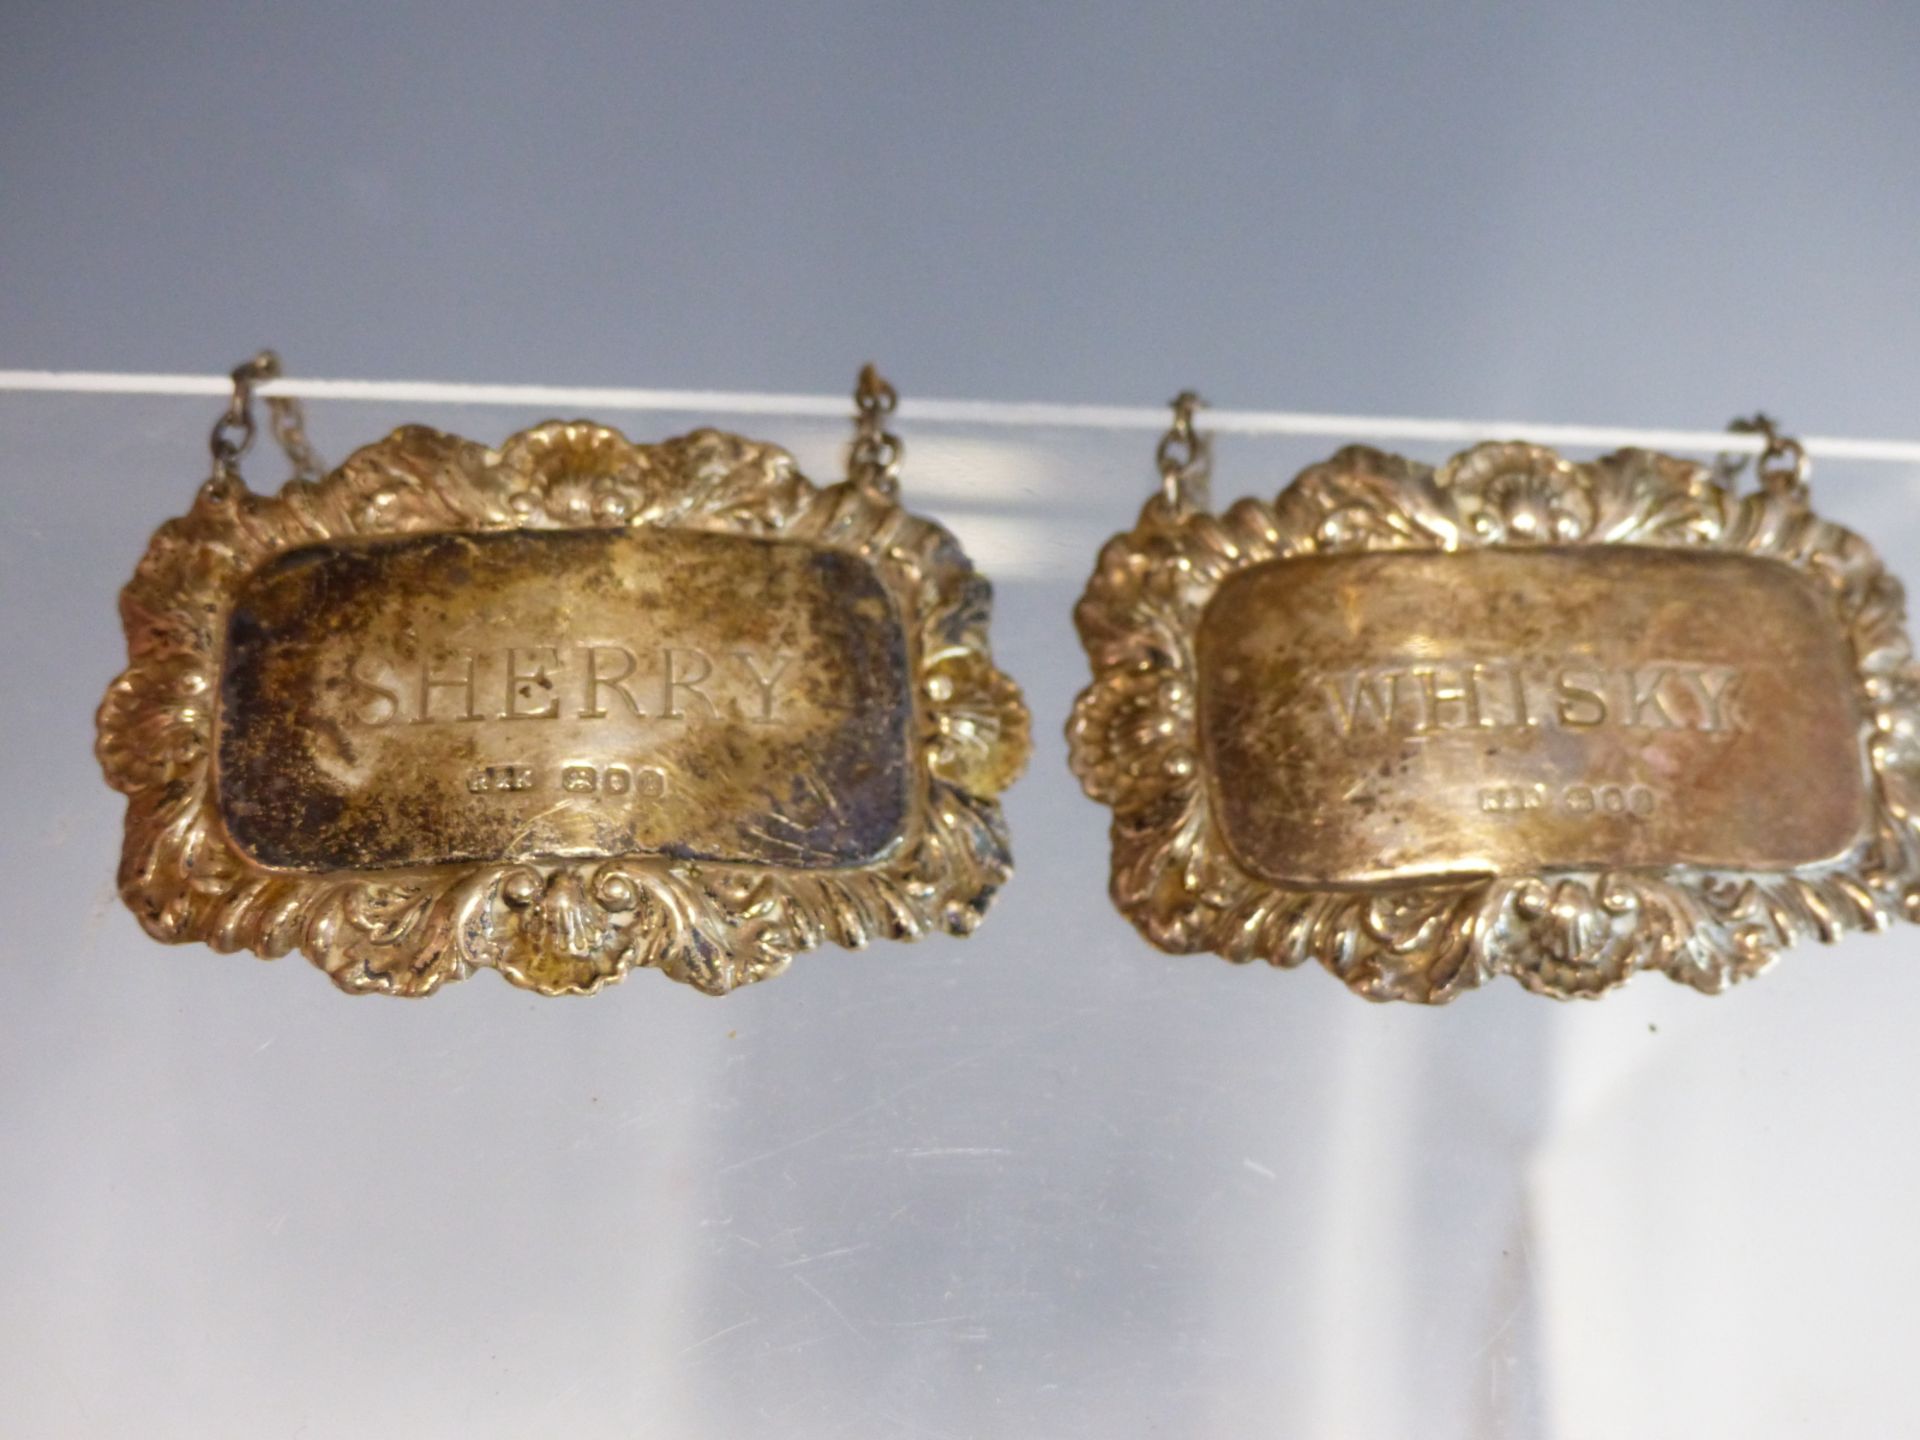 A PAIR OF HALLMARKED SILVER DECANTER LABELS FOR WHISKY AND SHERRY. LONDON HALLMARKS. - Image 2 of 3